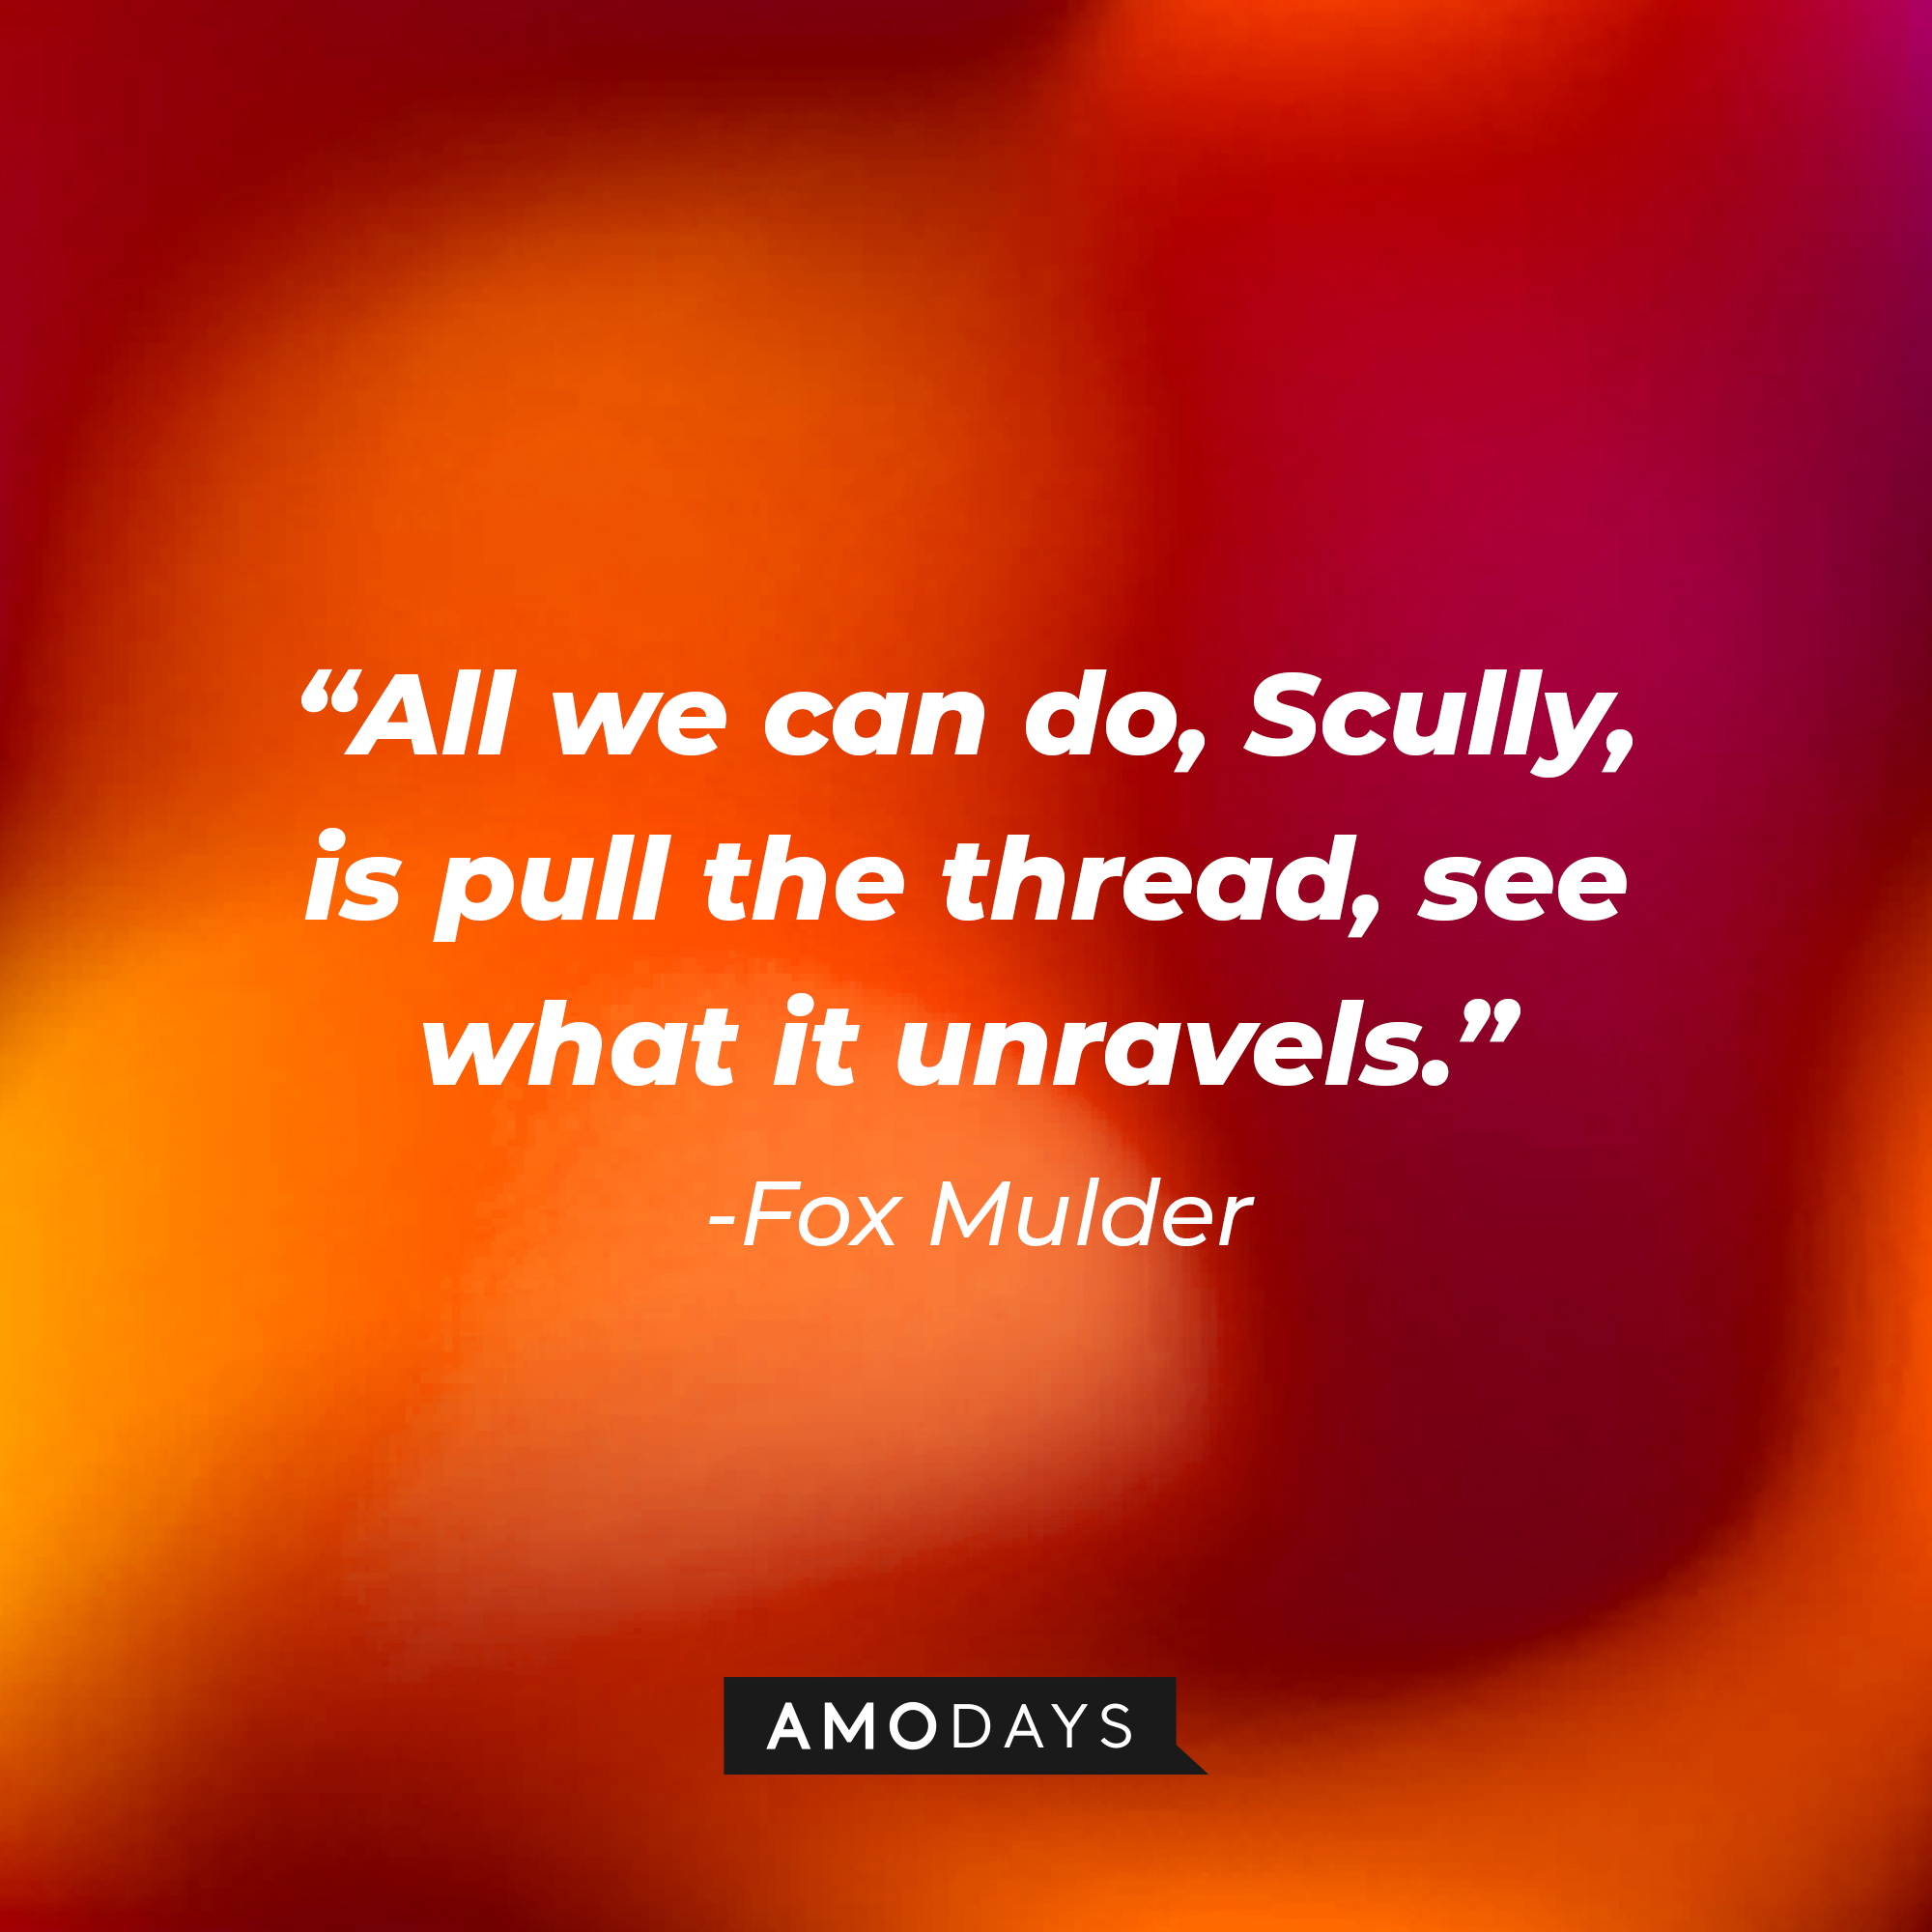 Fox Mulder's quote: "All we can do, Scully, is pull the thread, see what it unravels." | Source: AmoDays